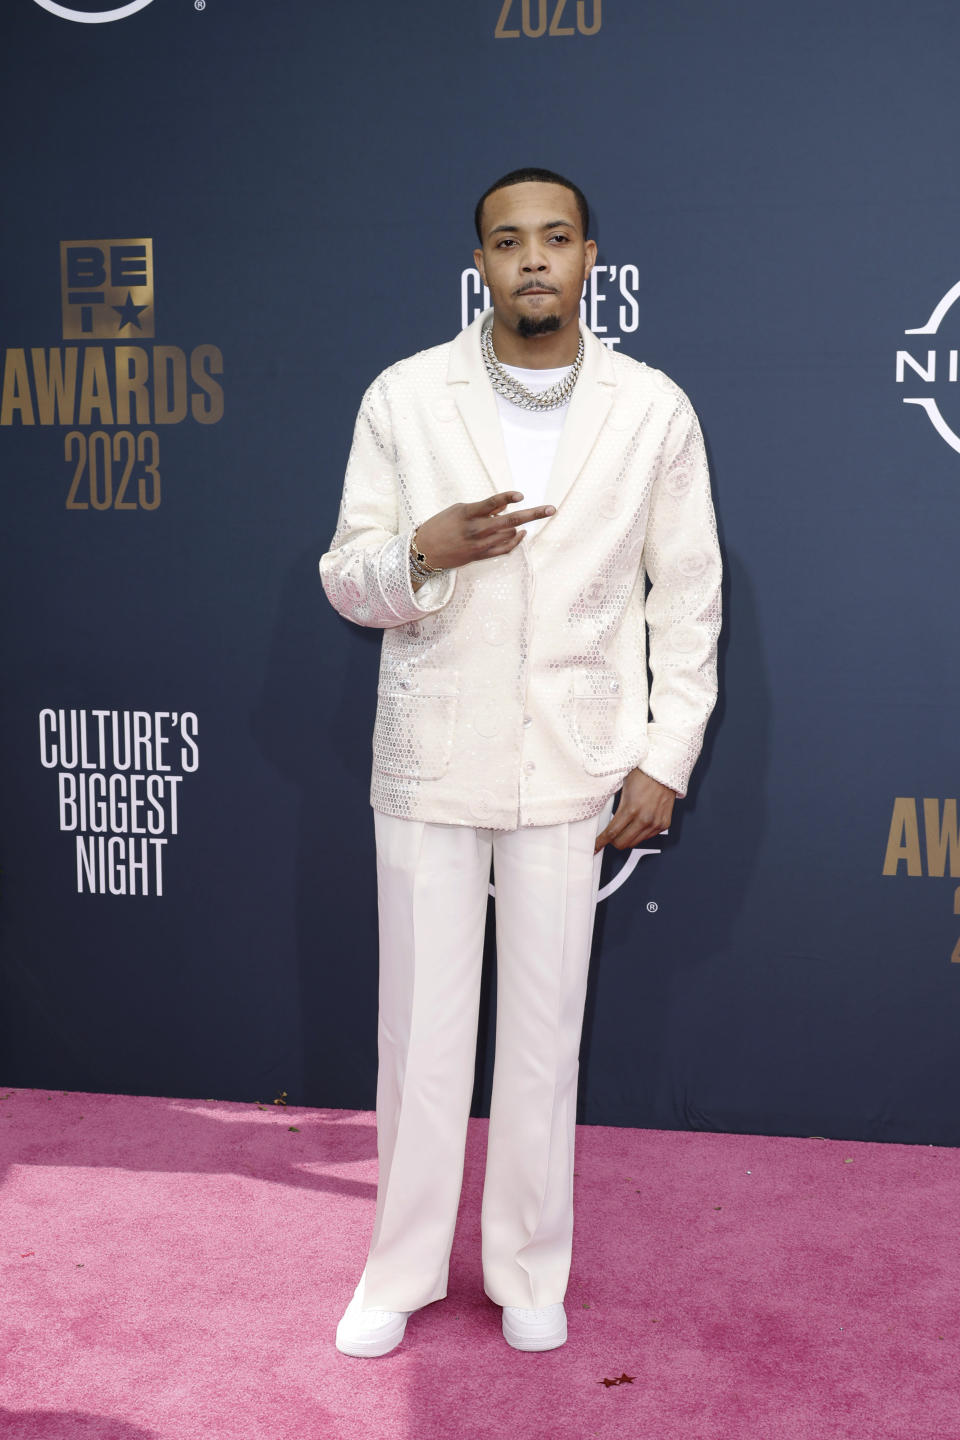 G Herbo attends the BET Awards 2023 at Microsoft Theater on June 25, 2023 in Los Angeles, California.